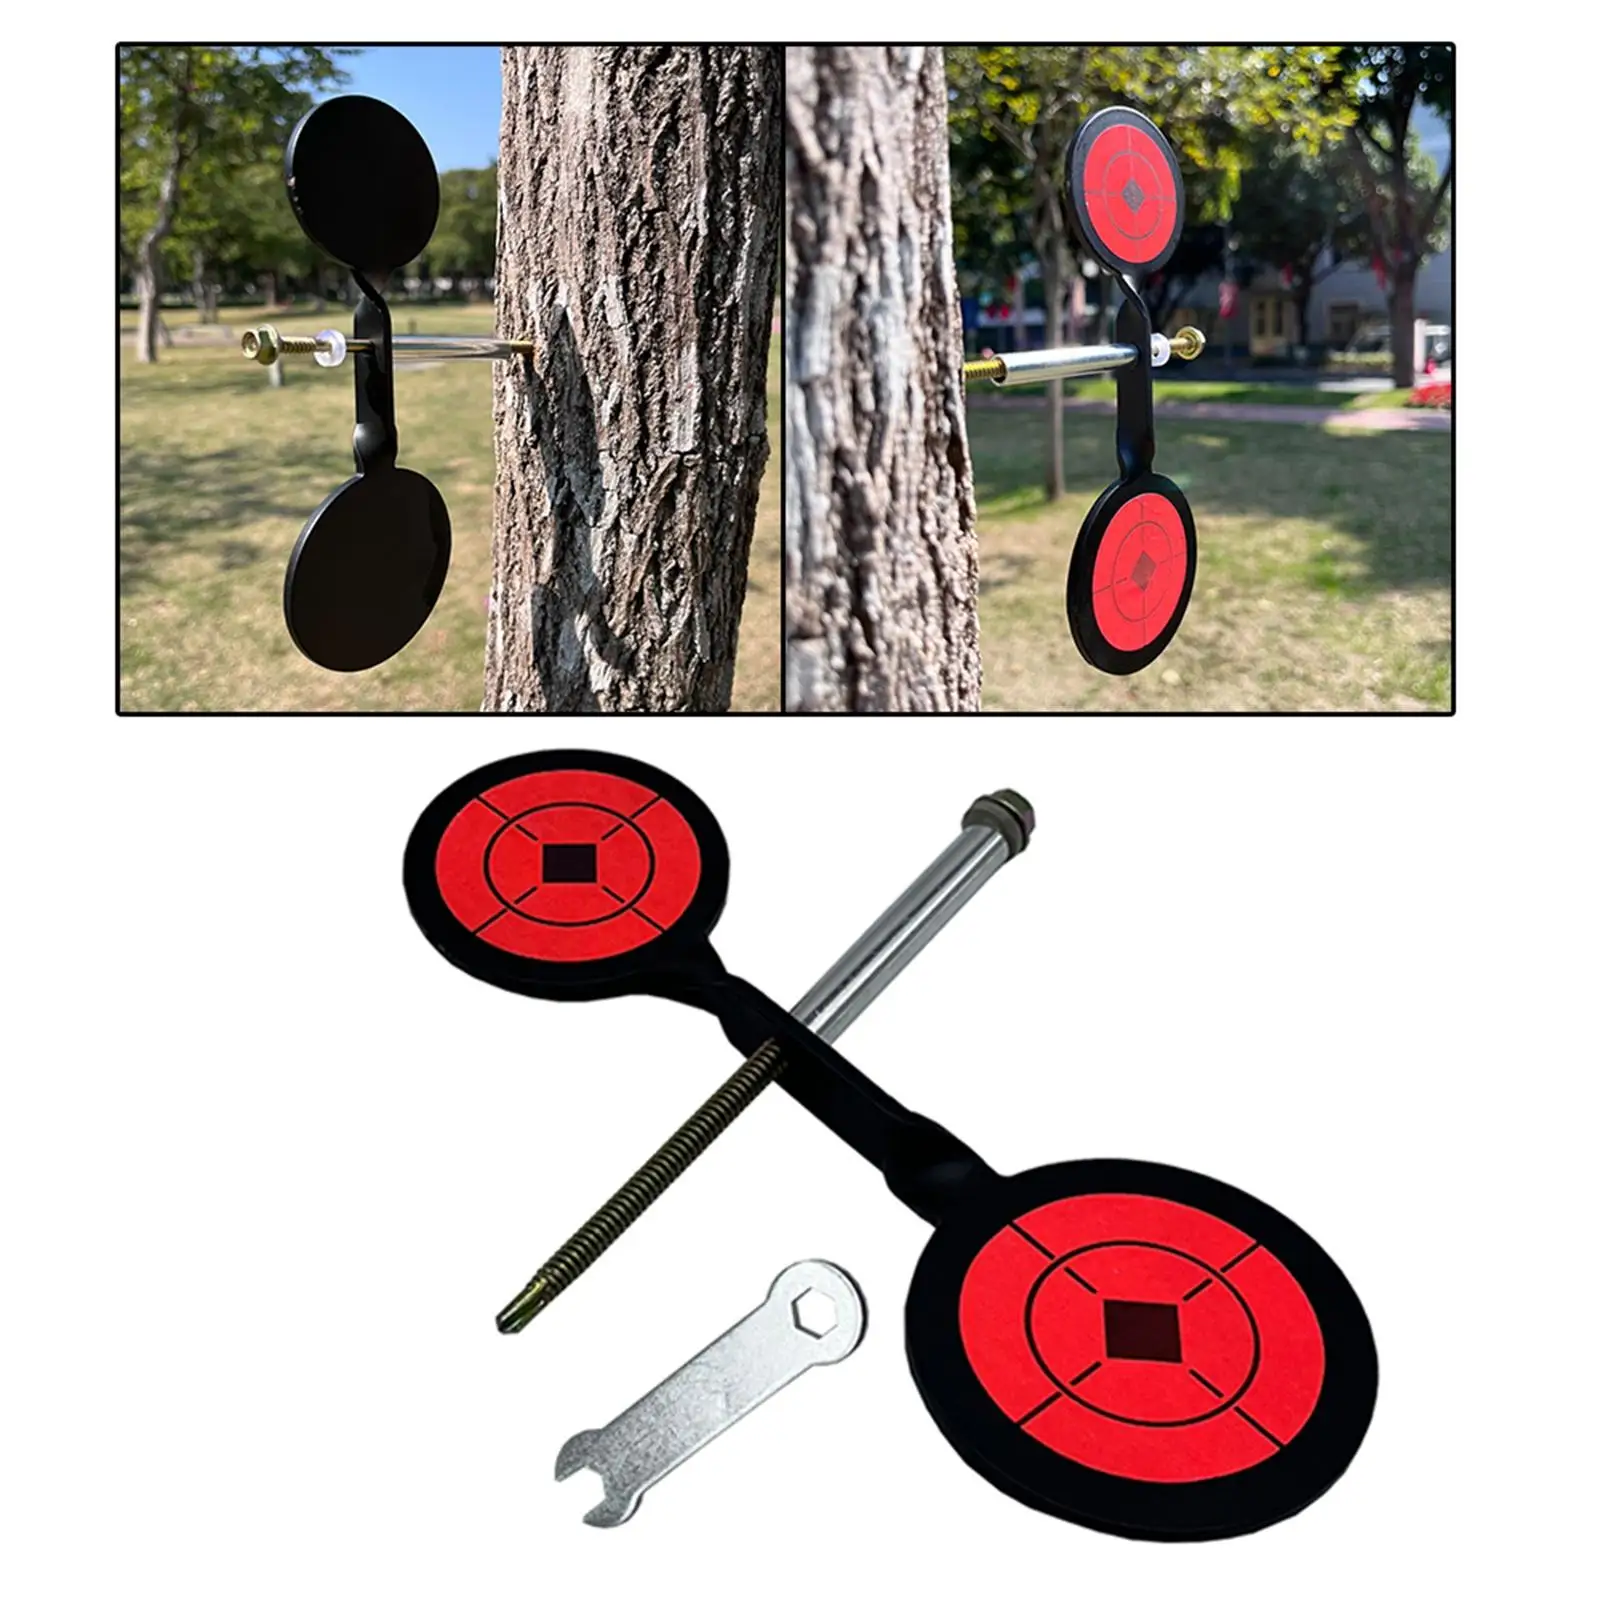 Resetting Target Reset Spinner Rotary Shooting Target for Hunting Practice